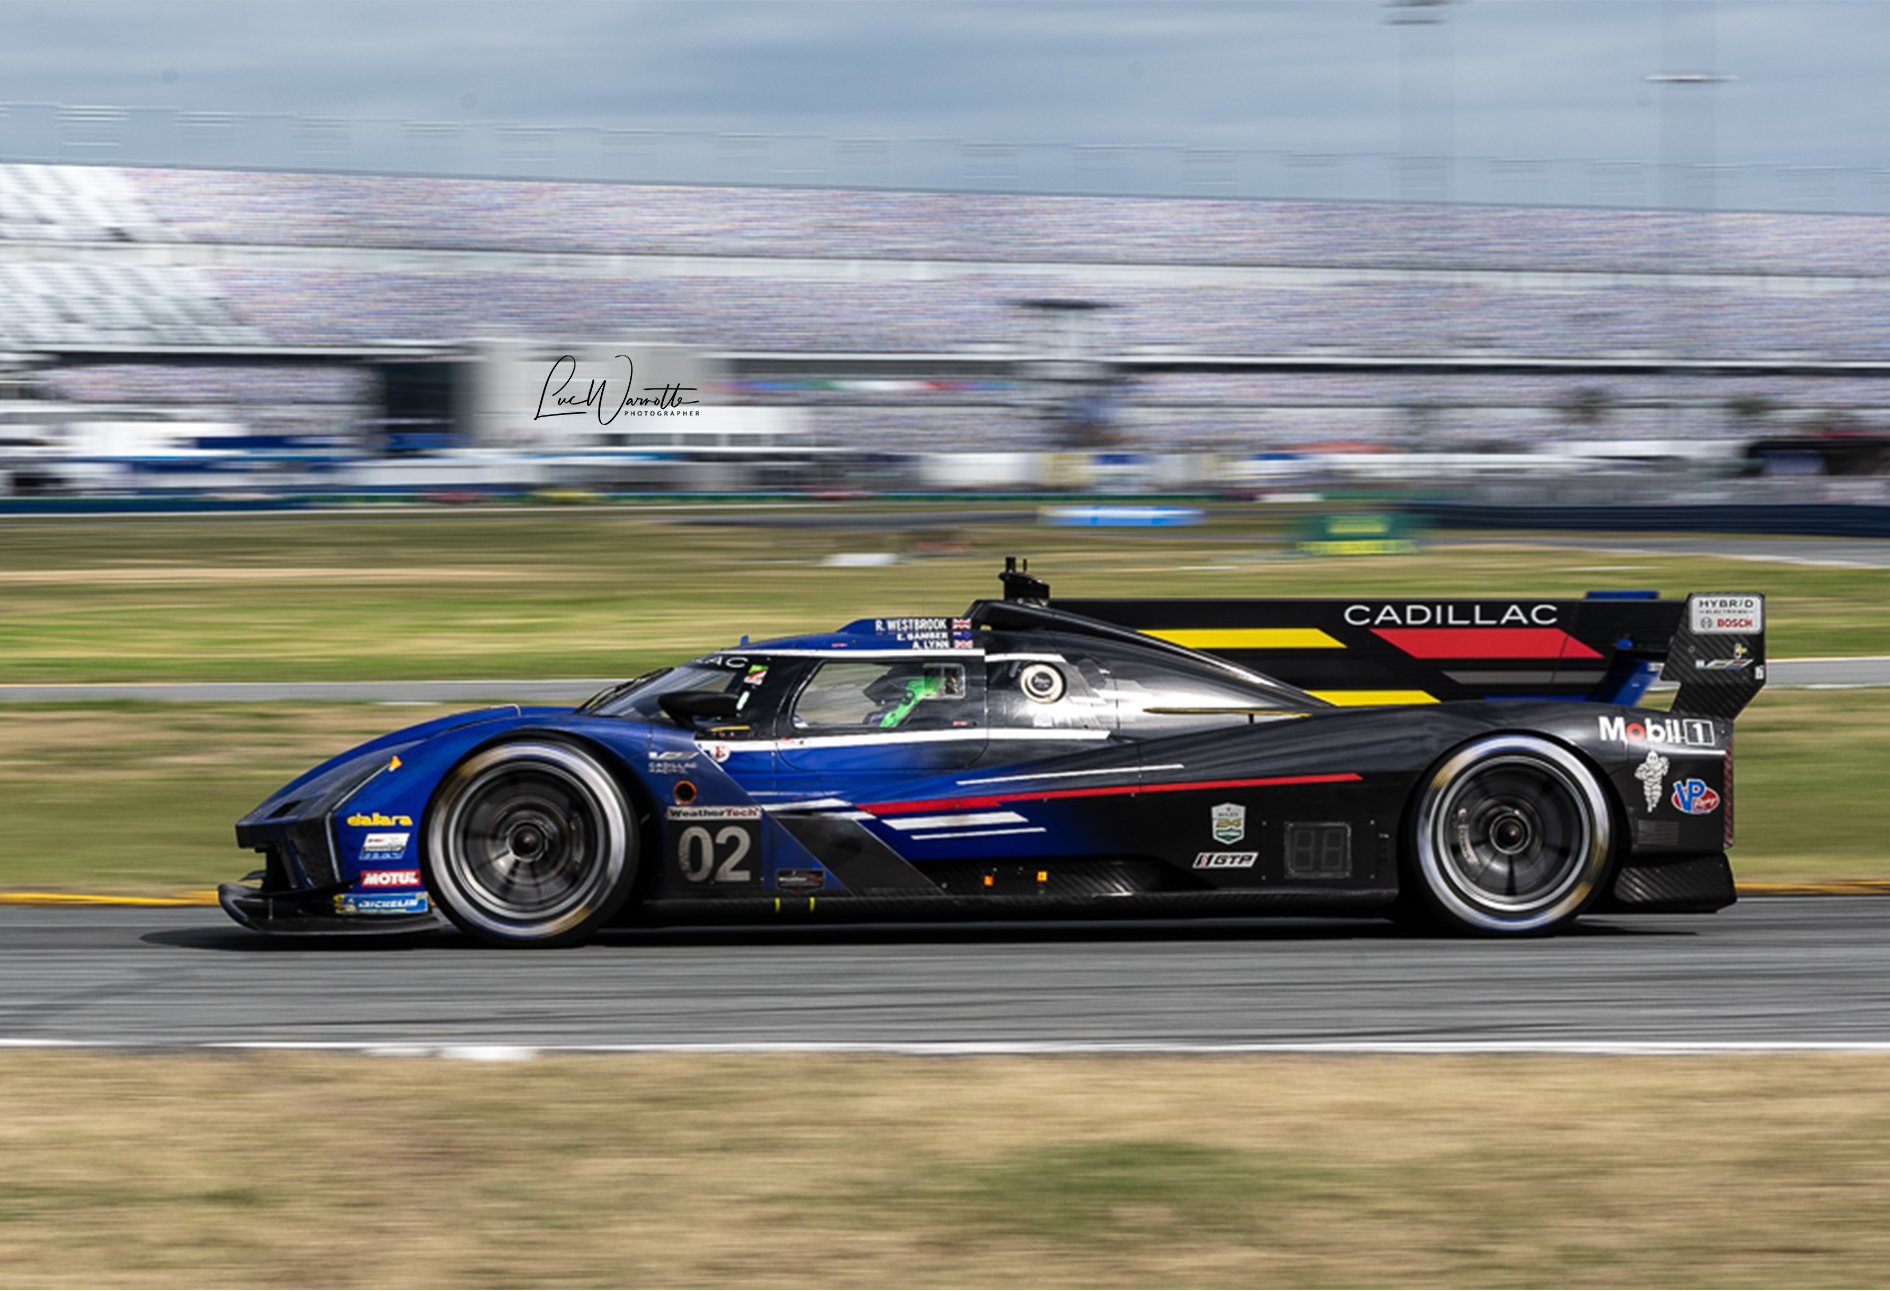 Cadillac to compete in 24 Hours of Le Mans